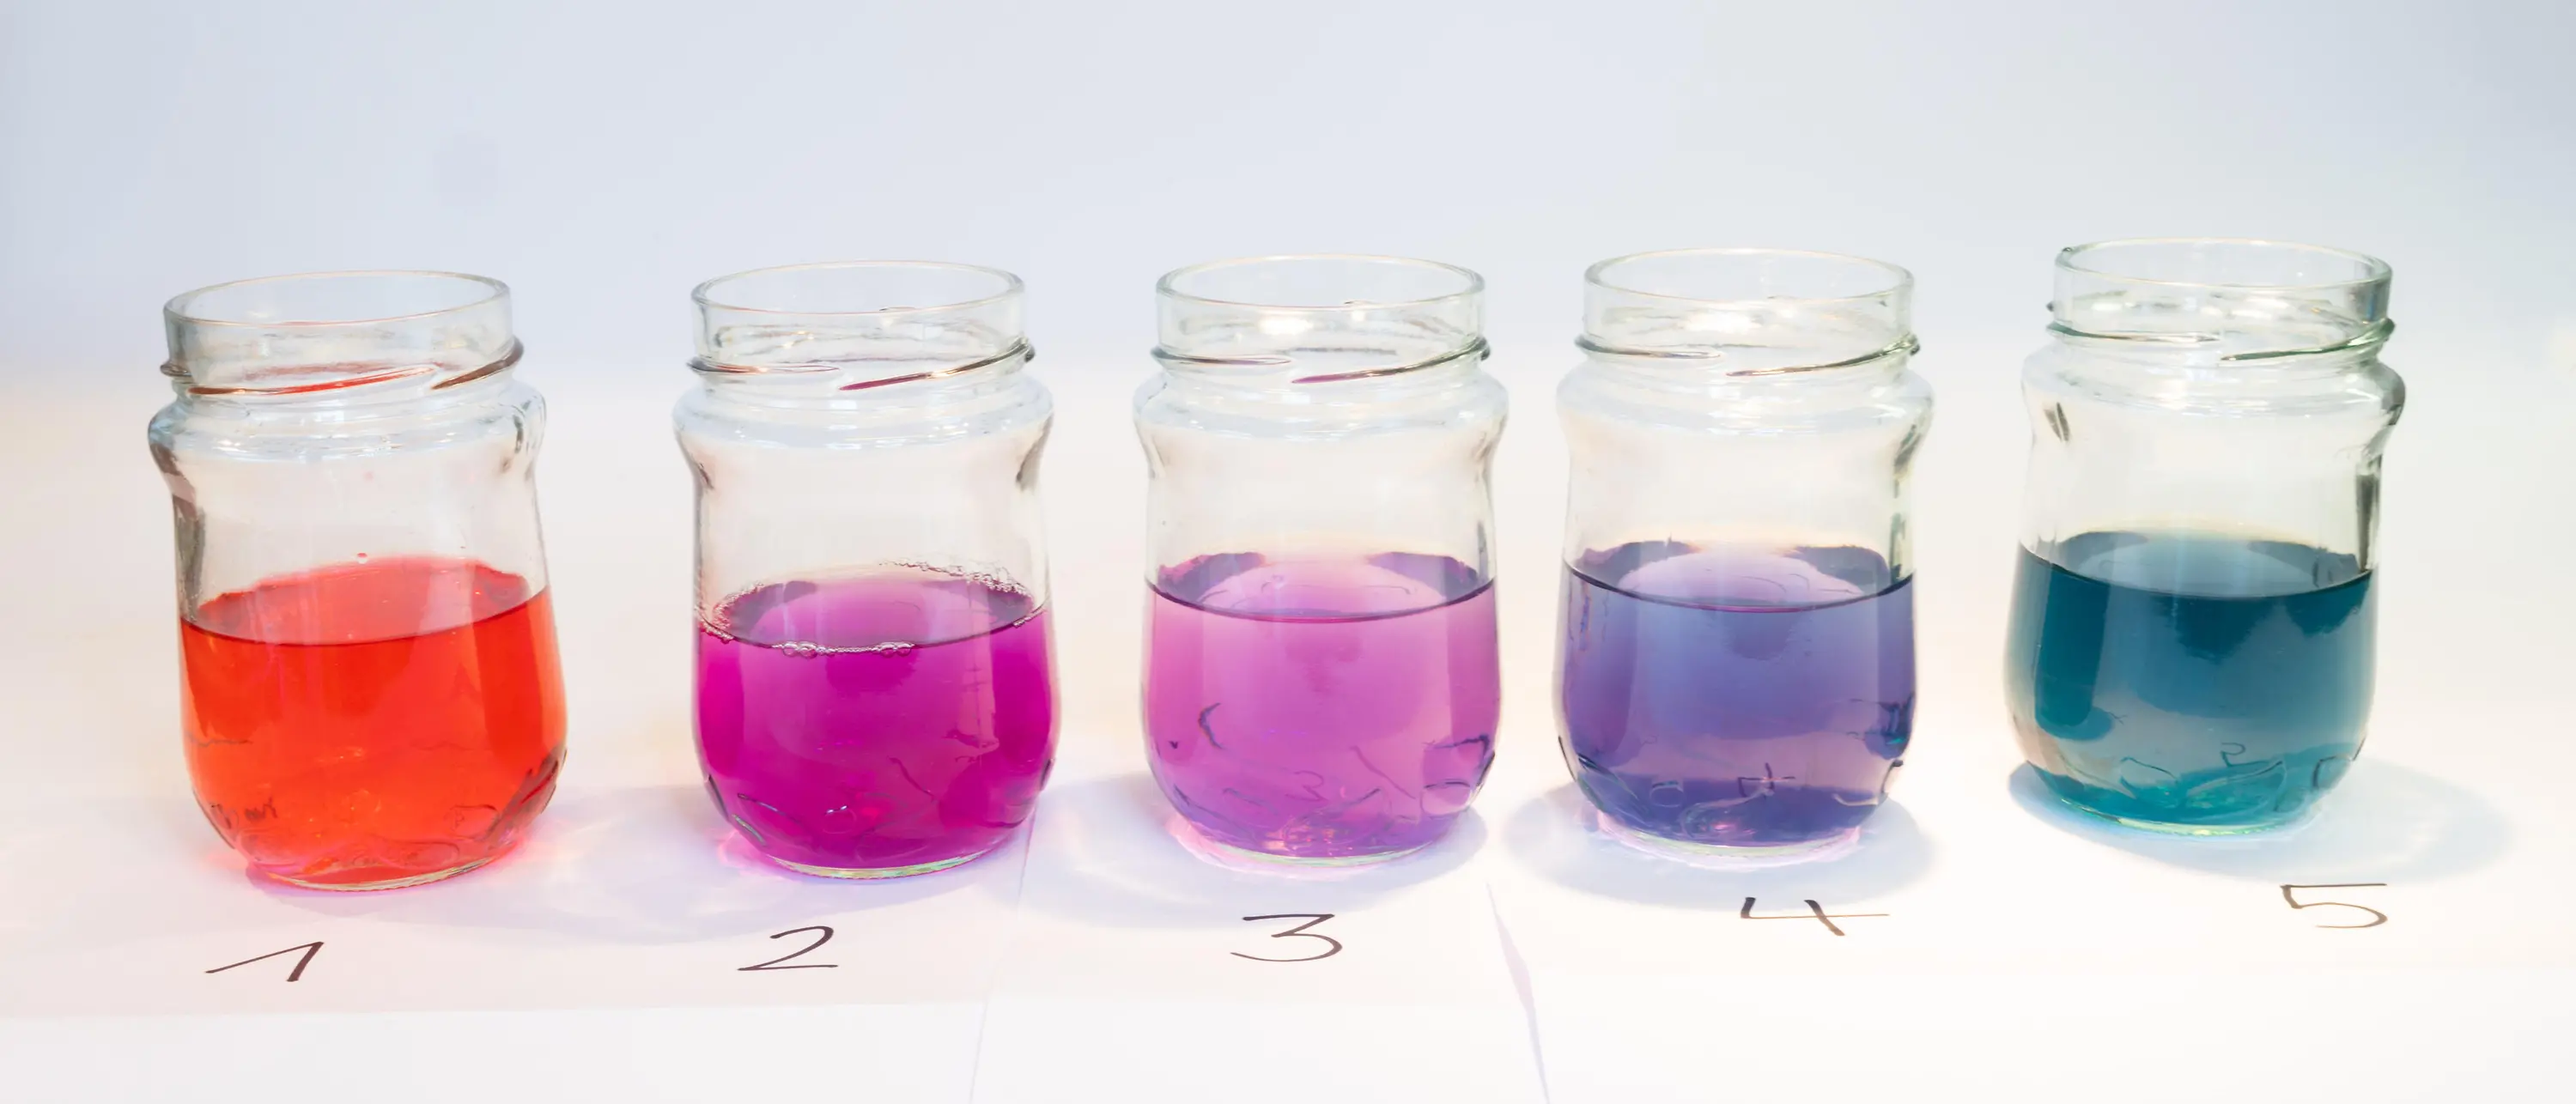 five glass jars with different colored liquids